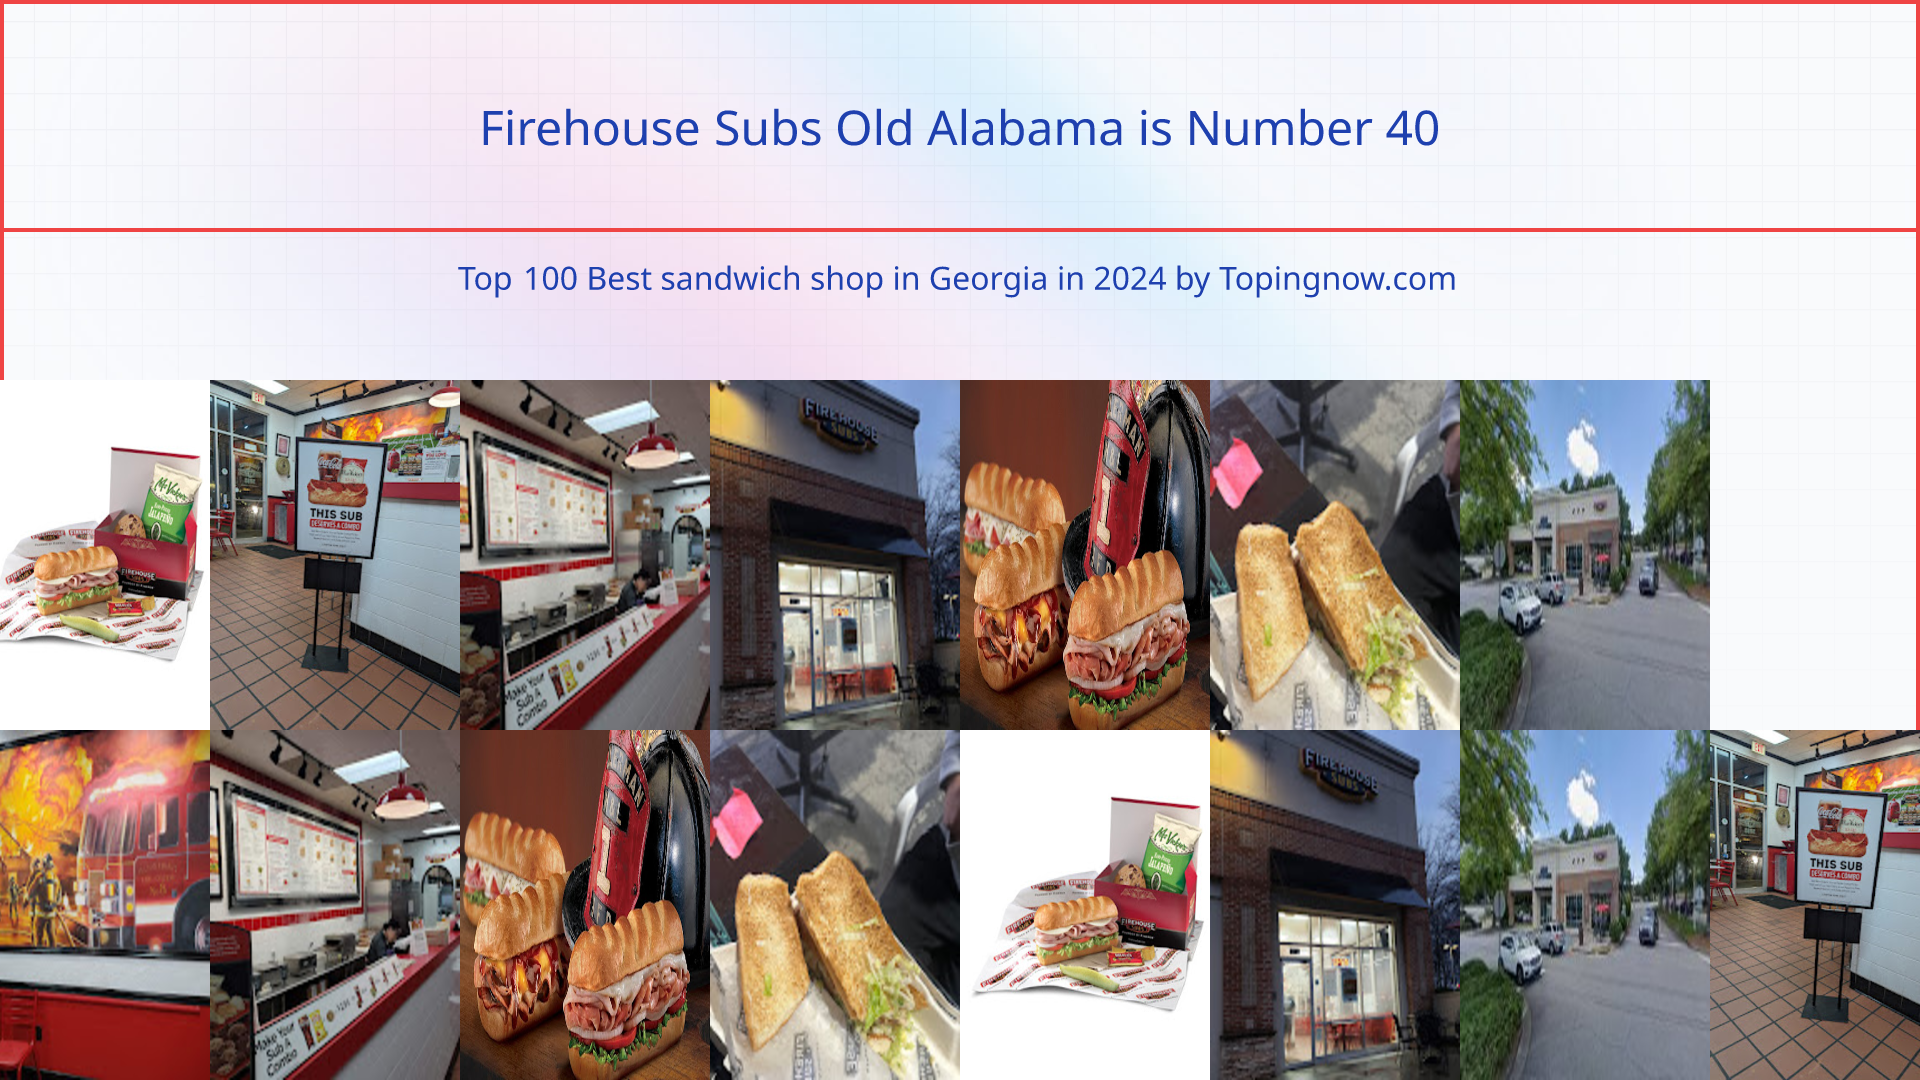 Firehouse Subs Old Alabama: Top 100 Best sandwich shop in Georgia in 2024